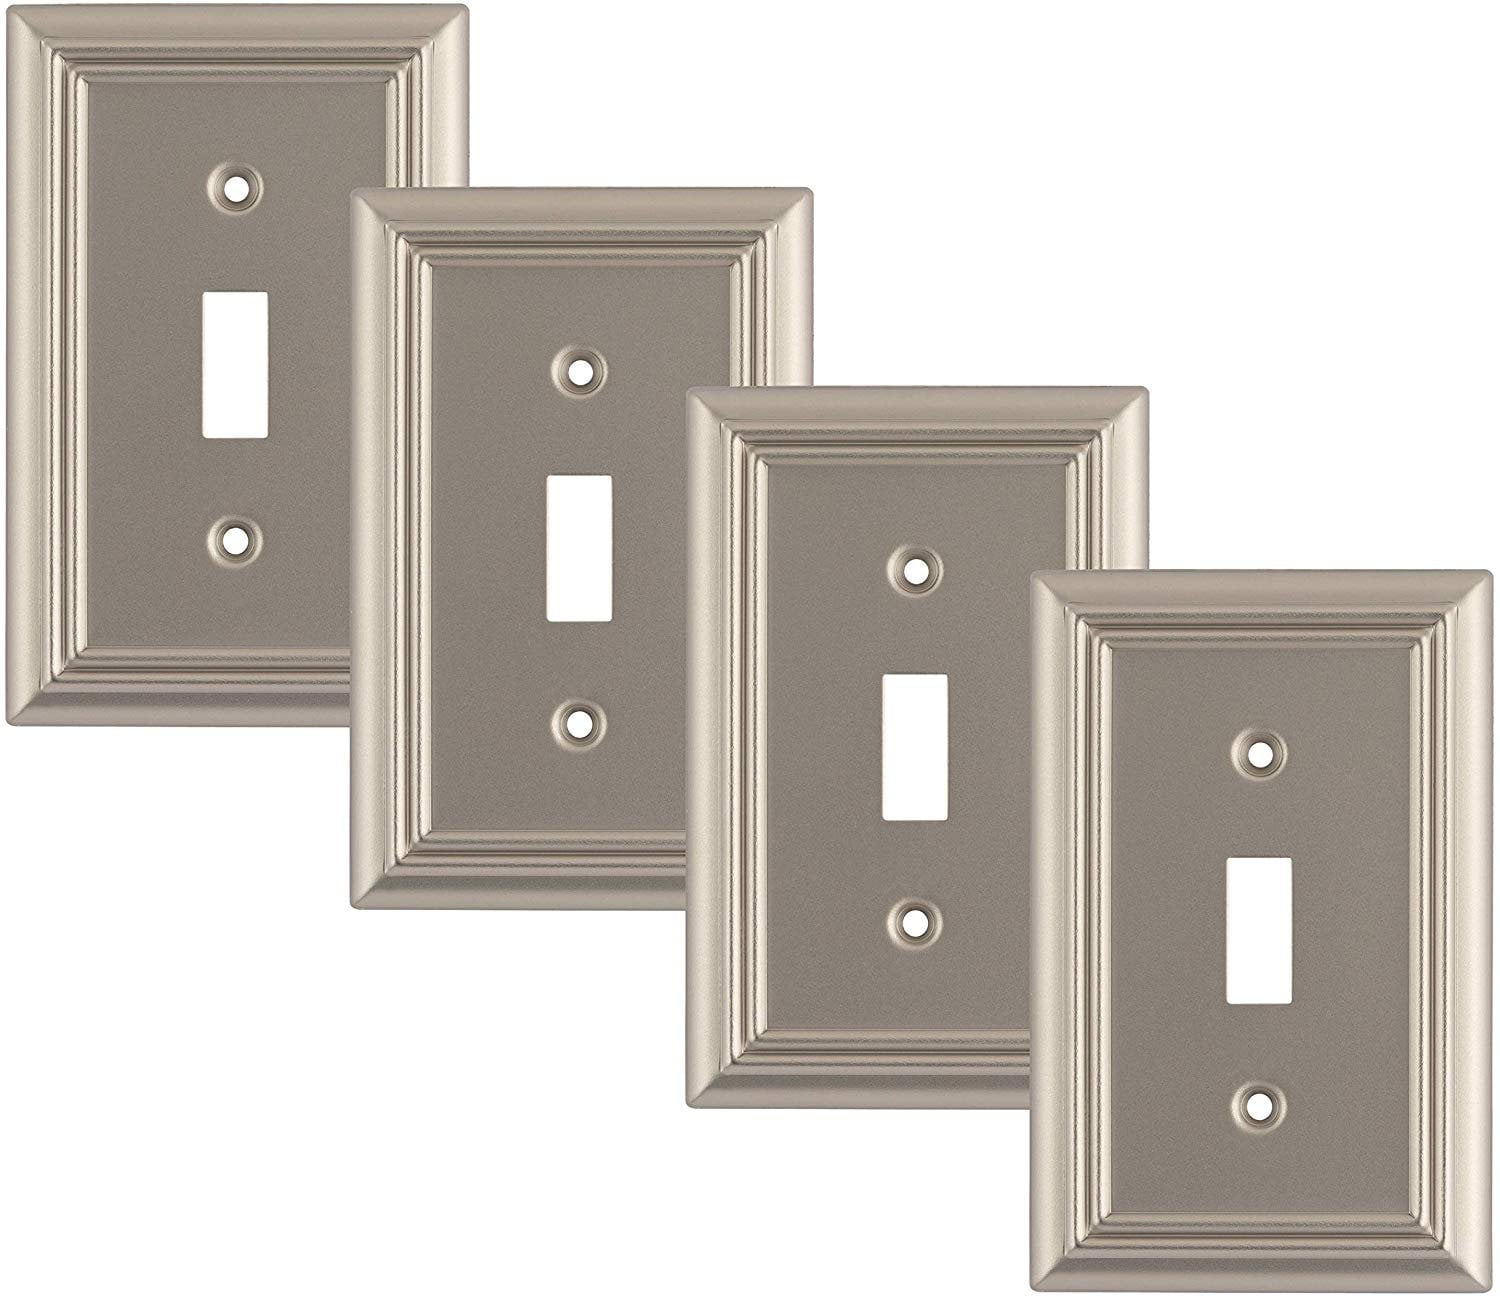 Pack of 4 Wall Plate Outlet Switch Covers by SleekLighting | Decorative